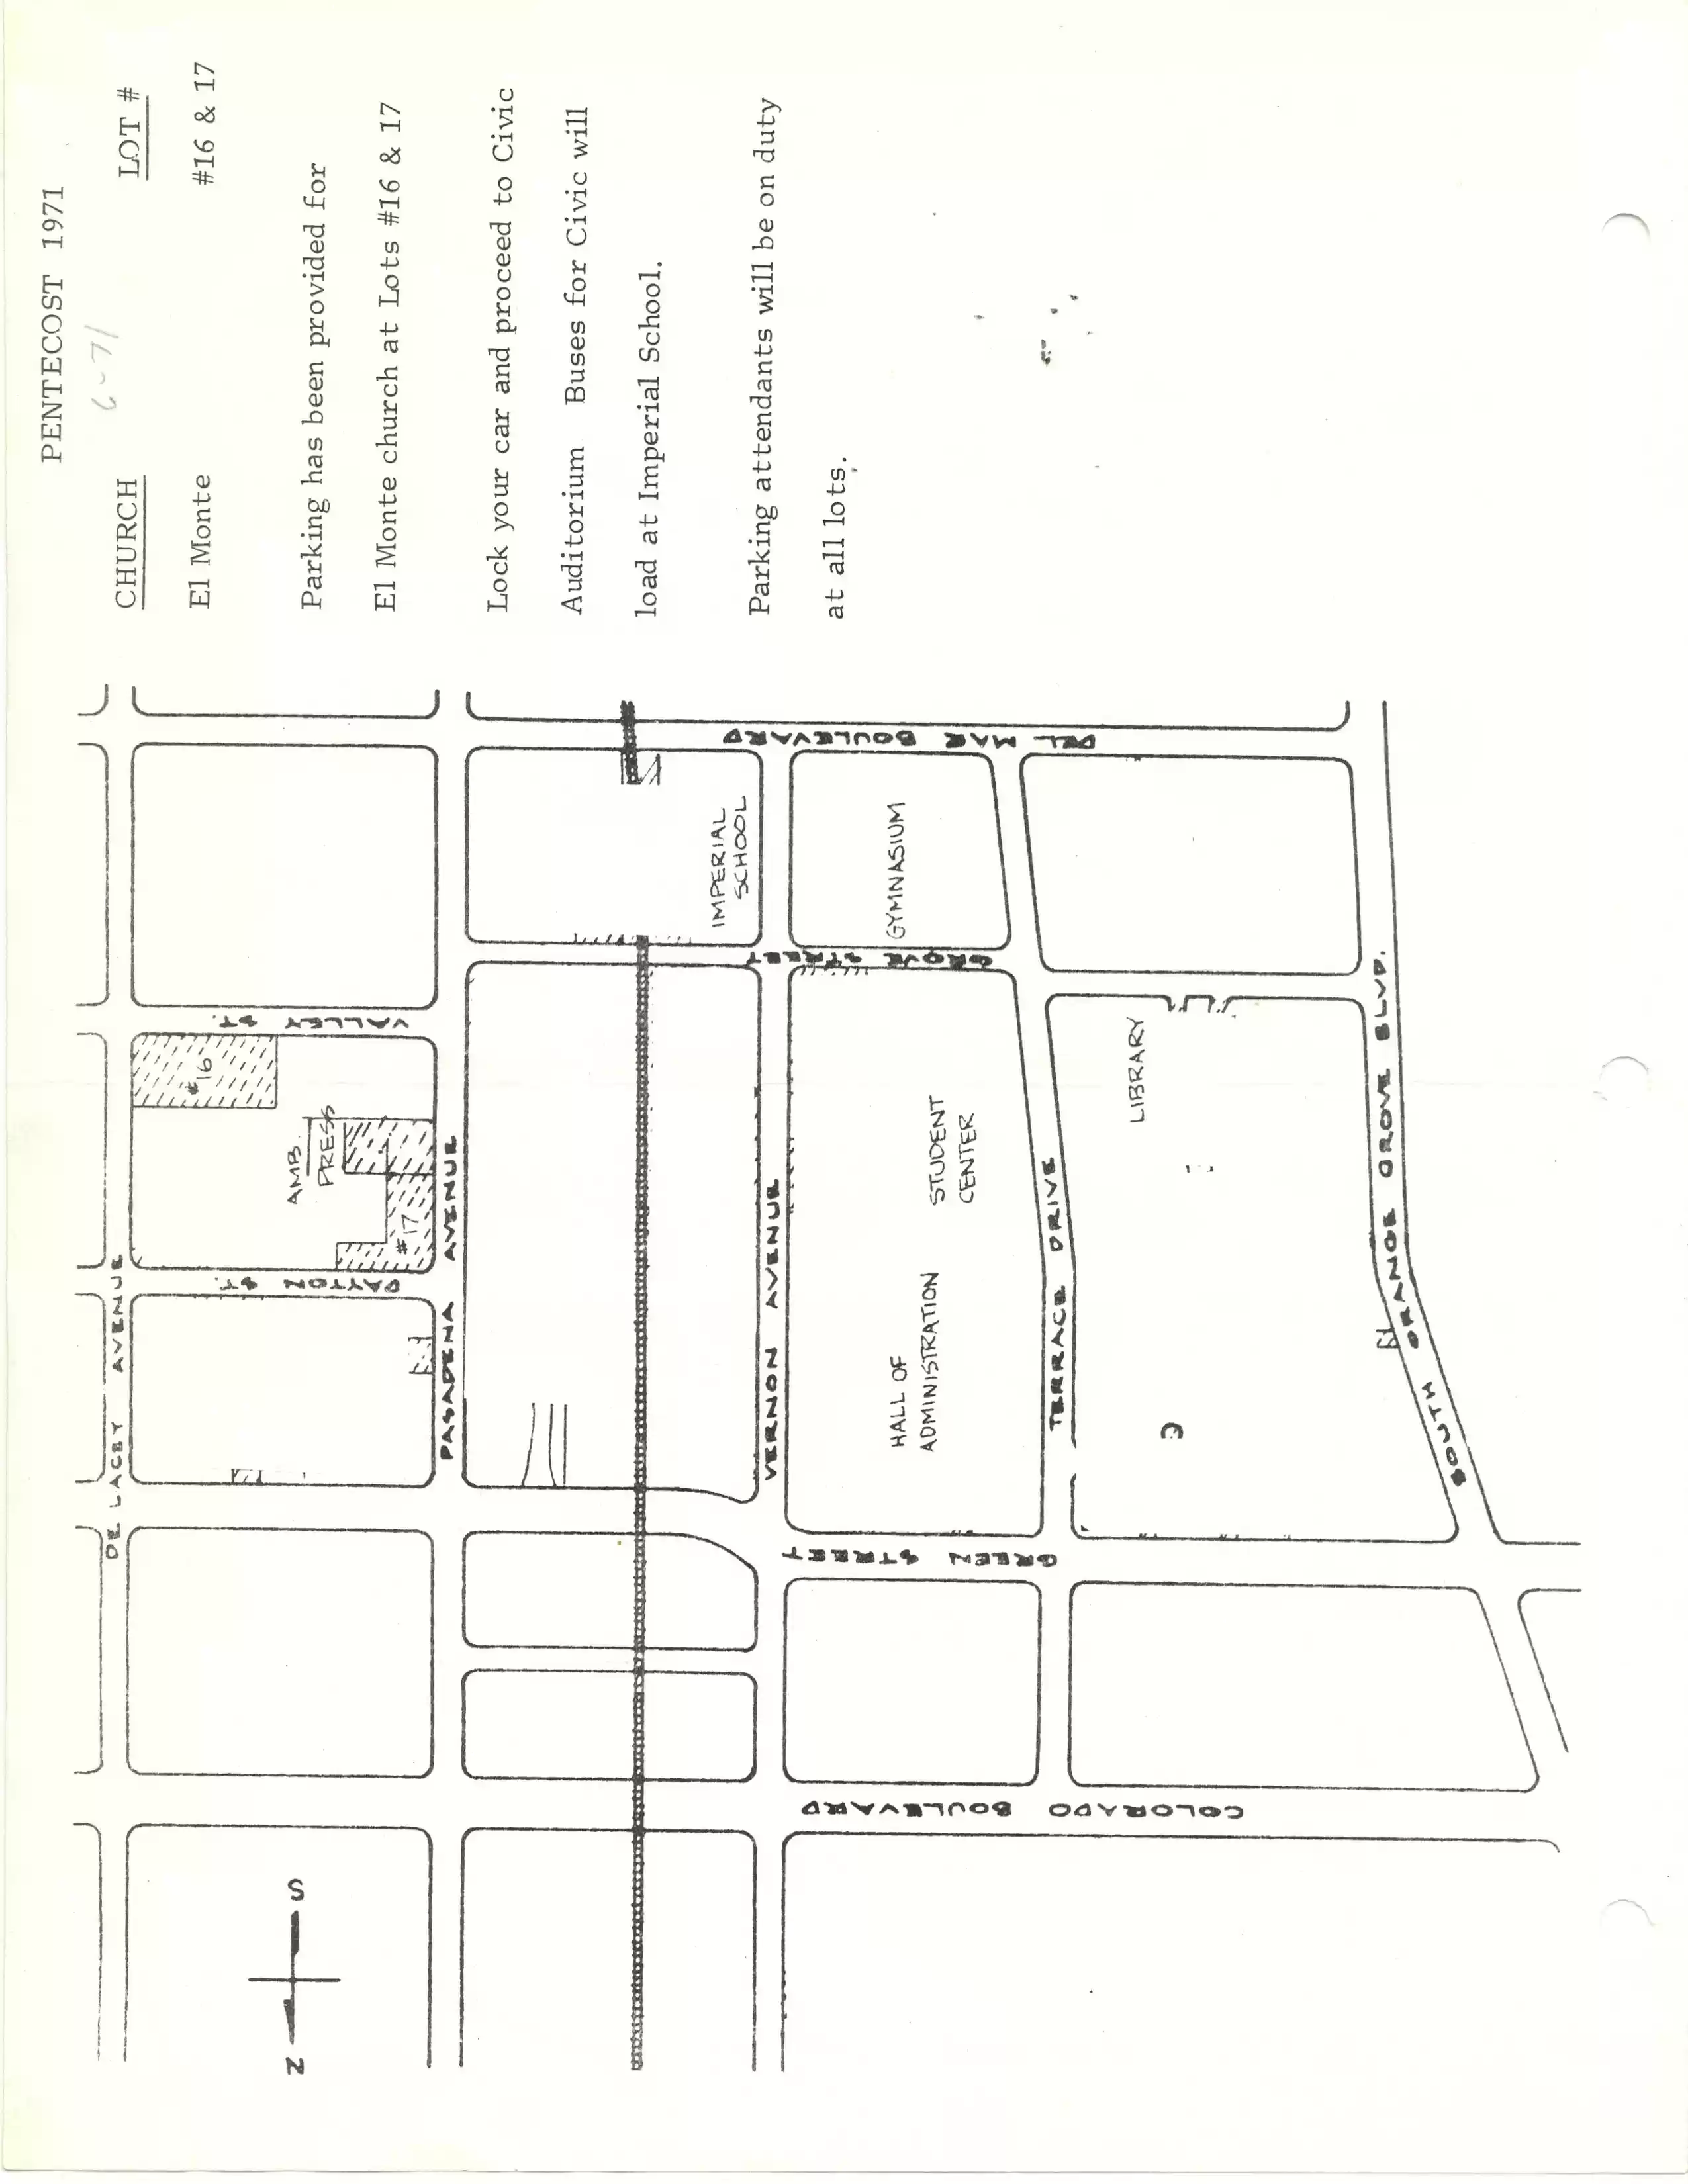 El Monte church parking map at AC for Pentecost, 6-1971